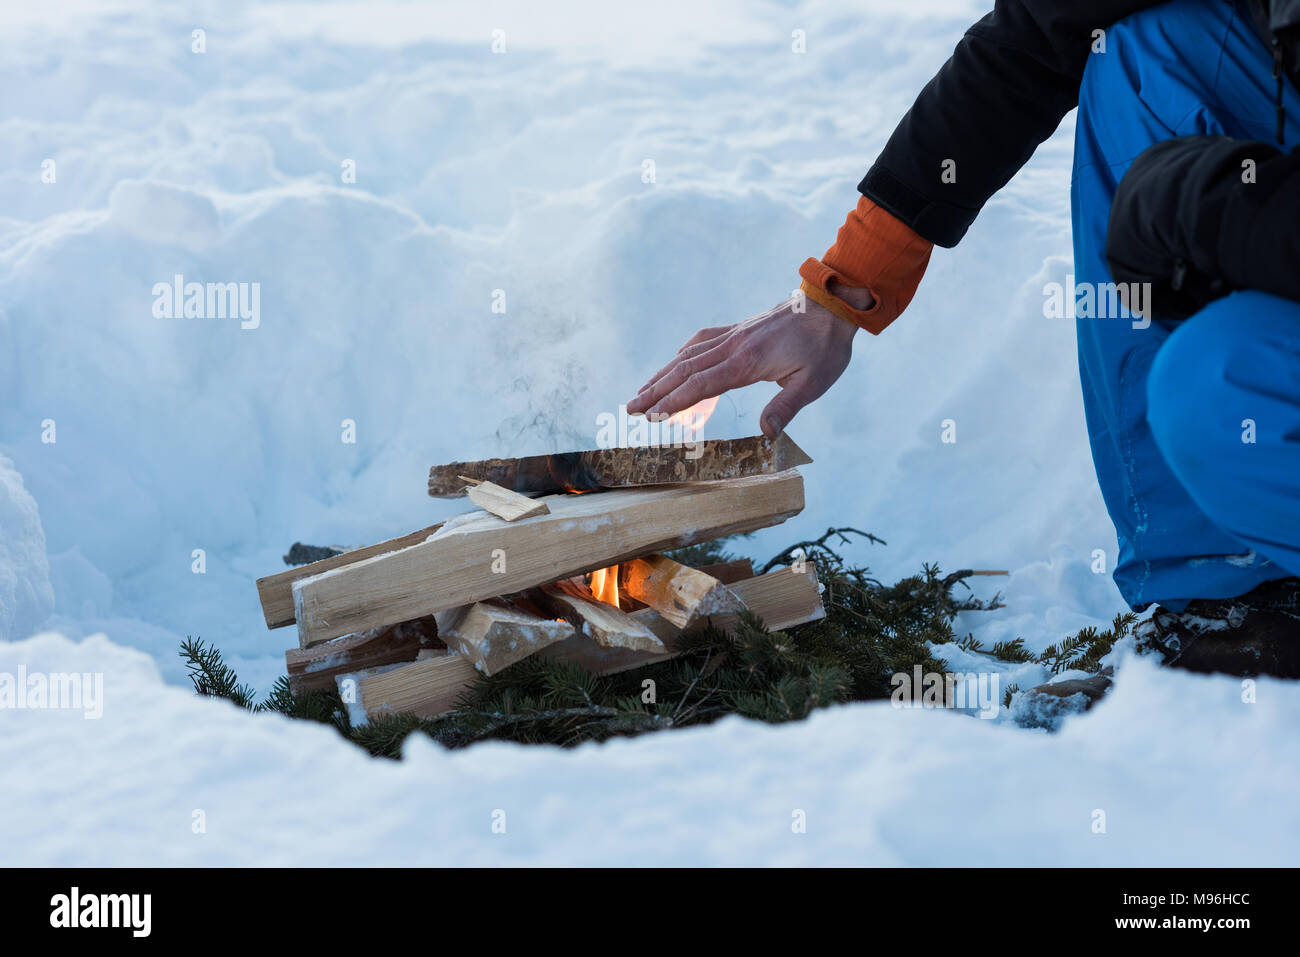 Man warming up by the bonfire during winter Stock Photo